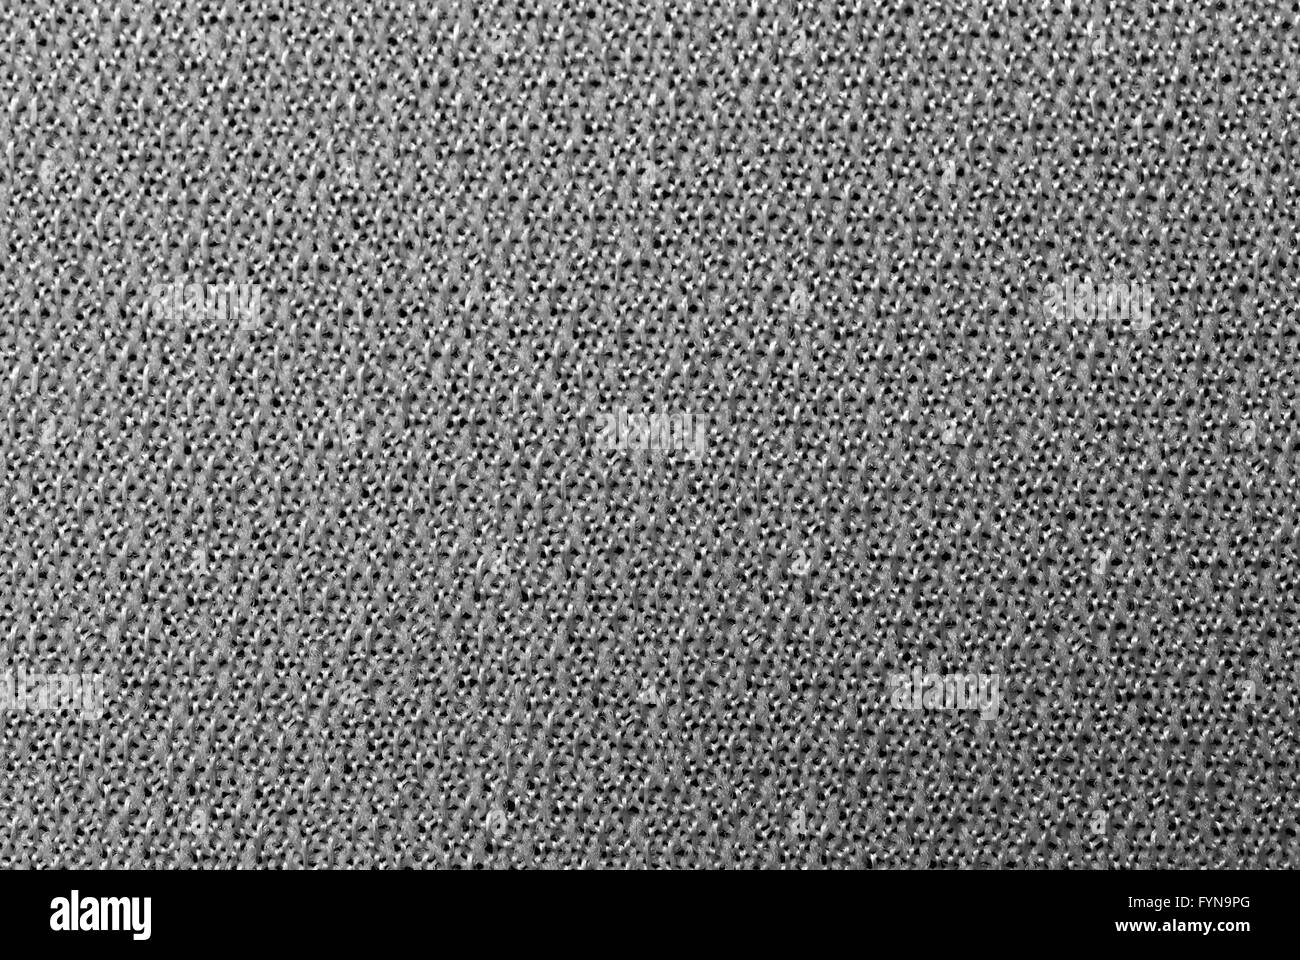 Beige fabric texture background Black and White Stock Photos & Images ...